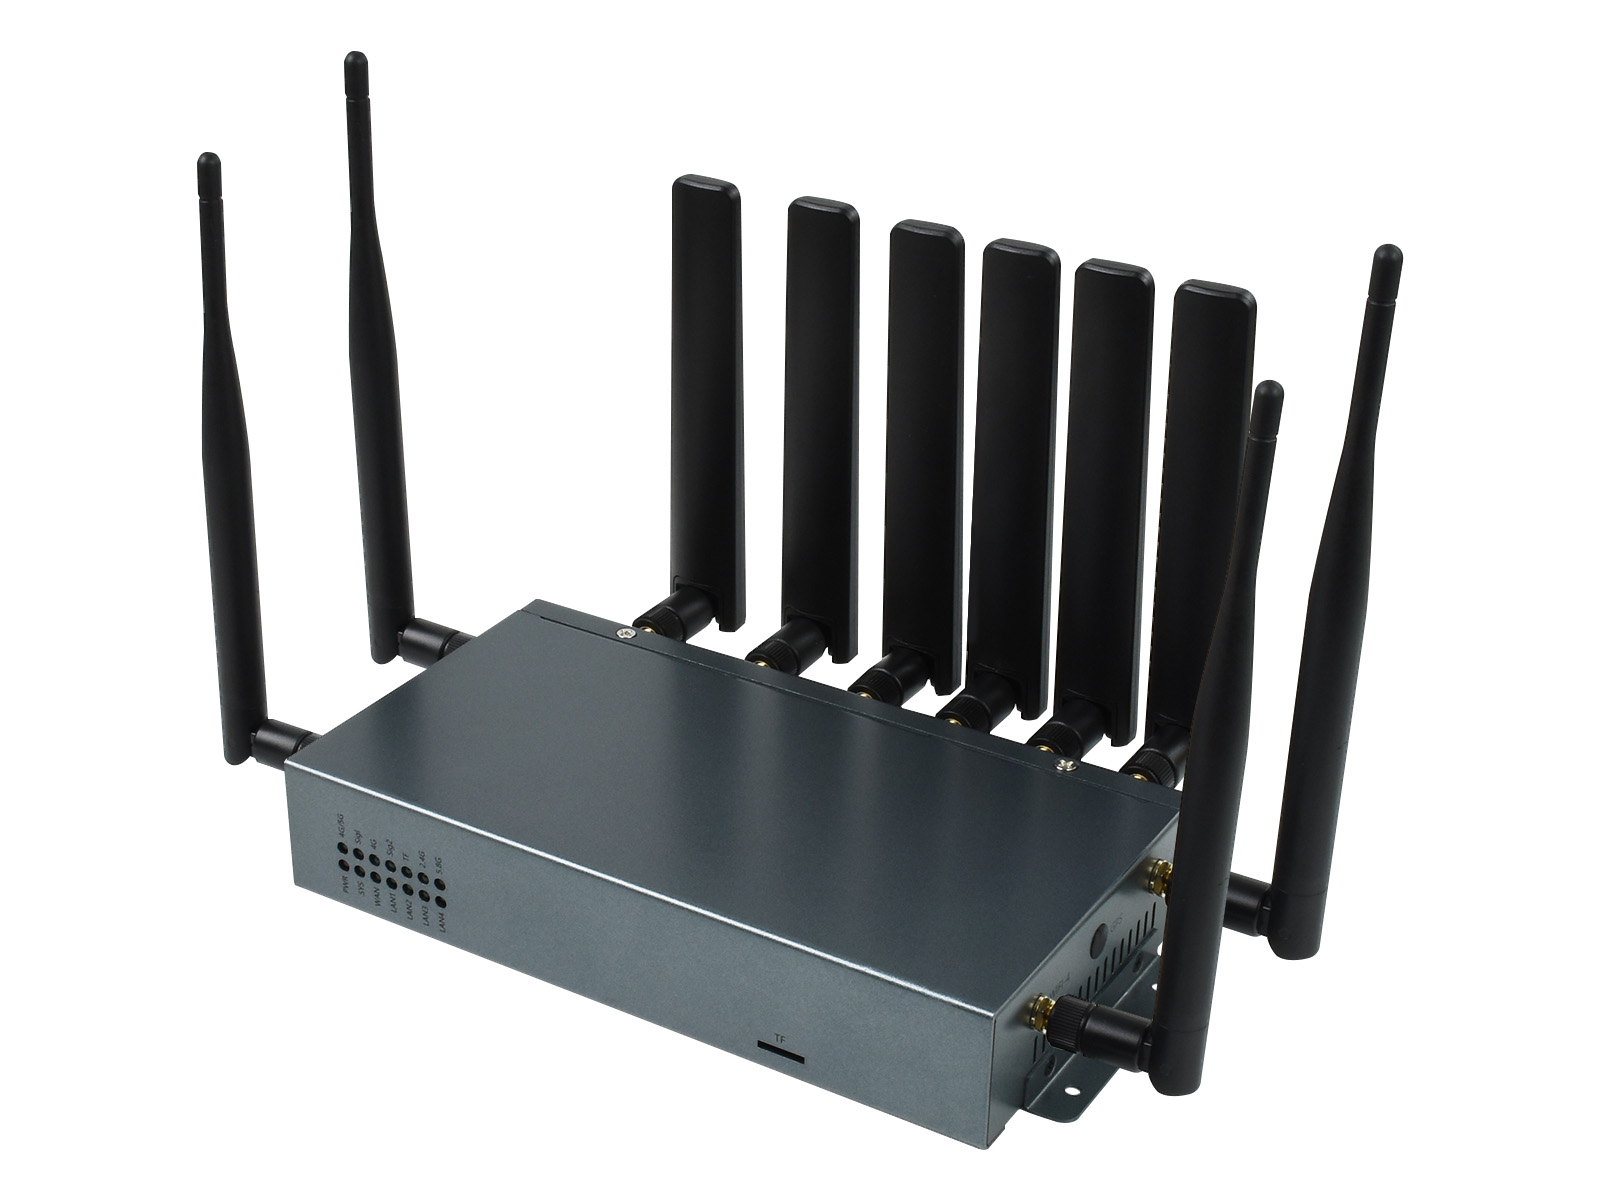 SIM8200EA-M2 Industrial 5G Router, Wireless CPE, Snapdragon X55